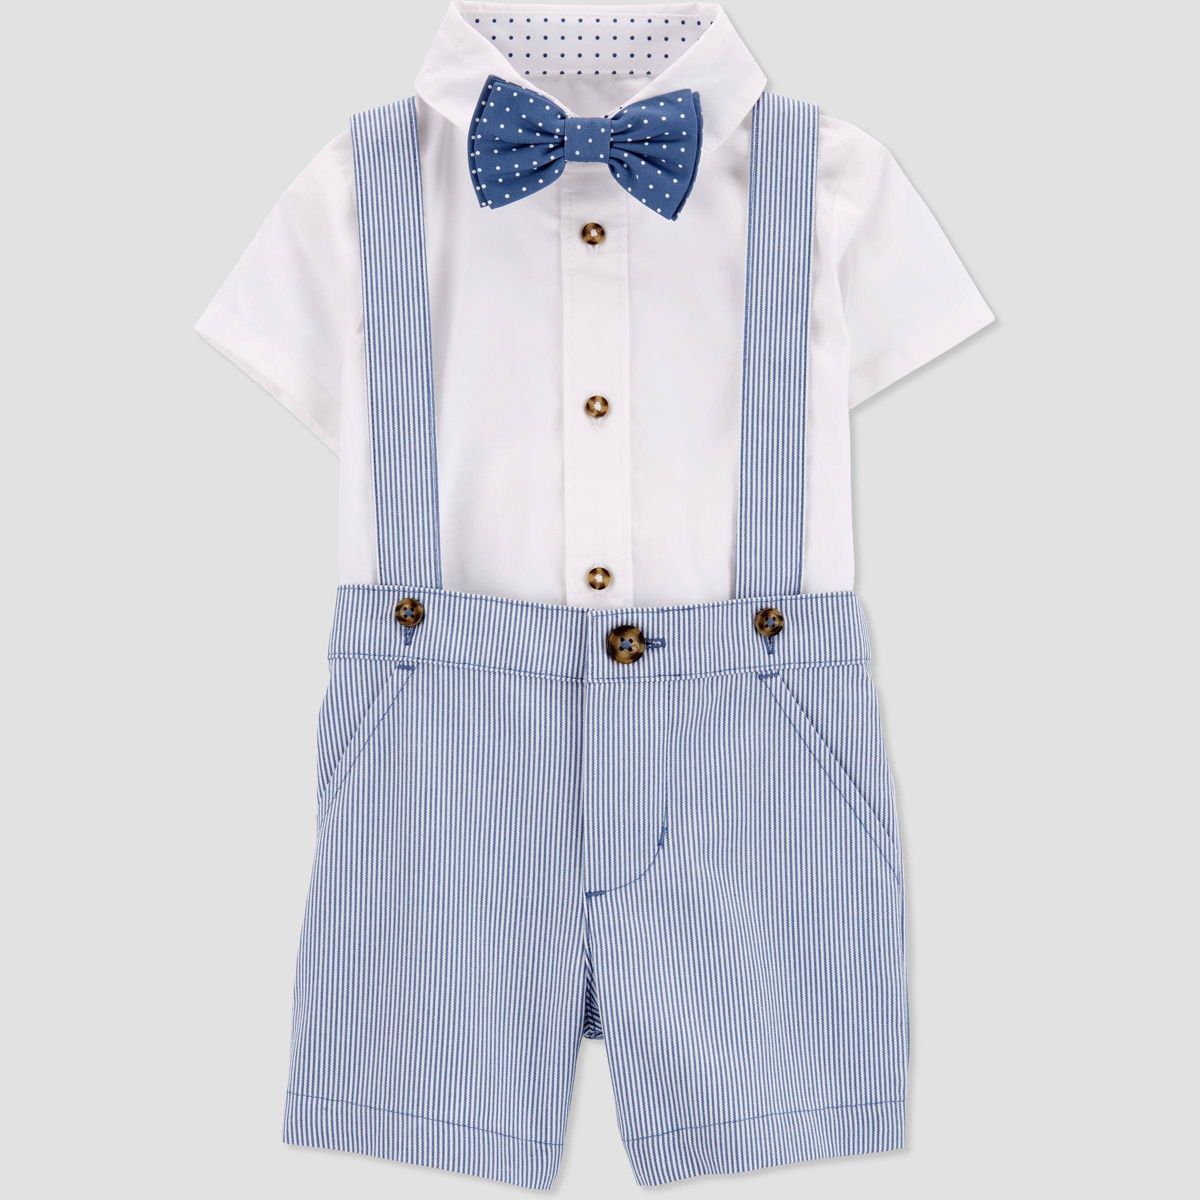 Carter's Just One You® Baby Boys' Striped Suspender Top & Shorts Set with Bow Tie - Blue/White | Target